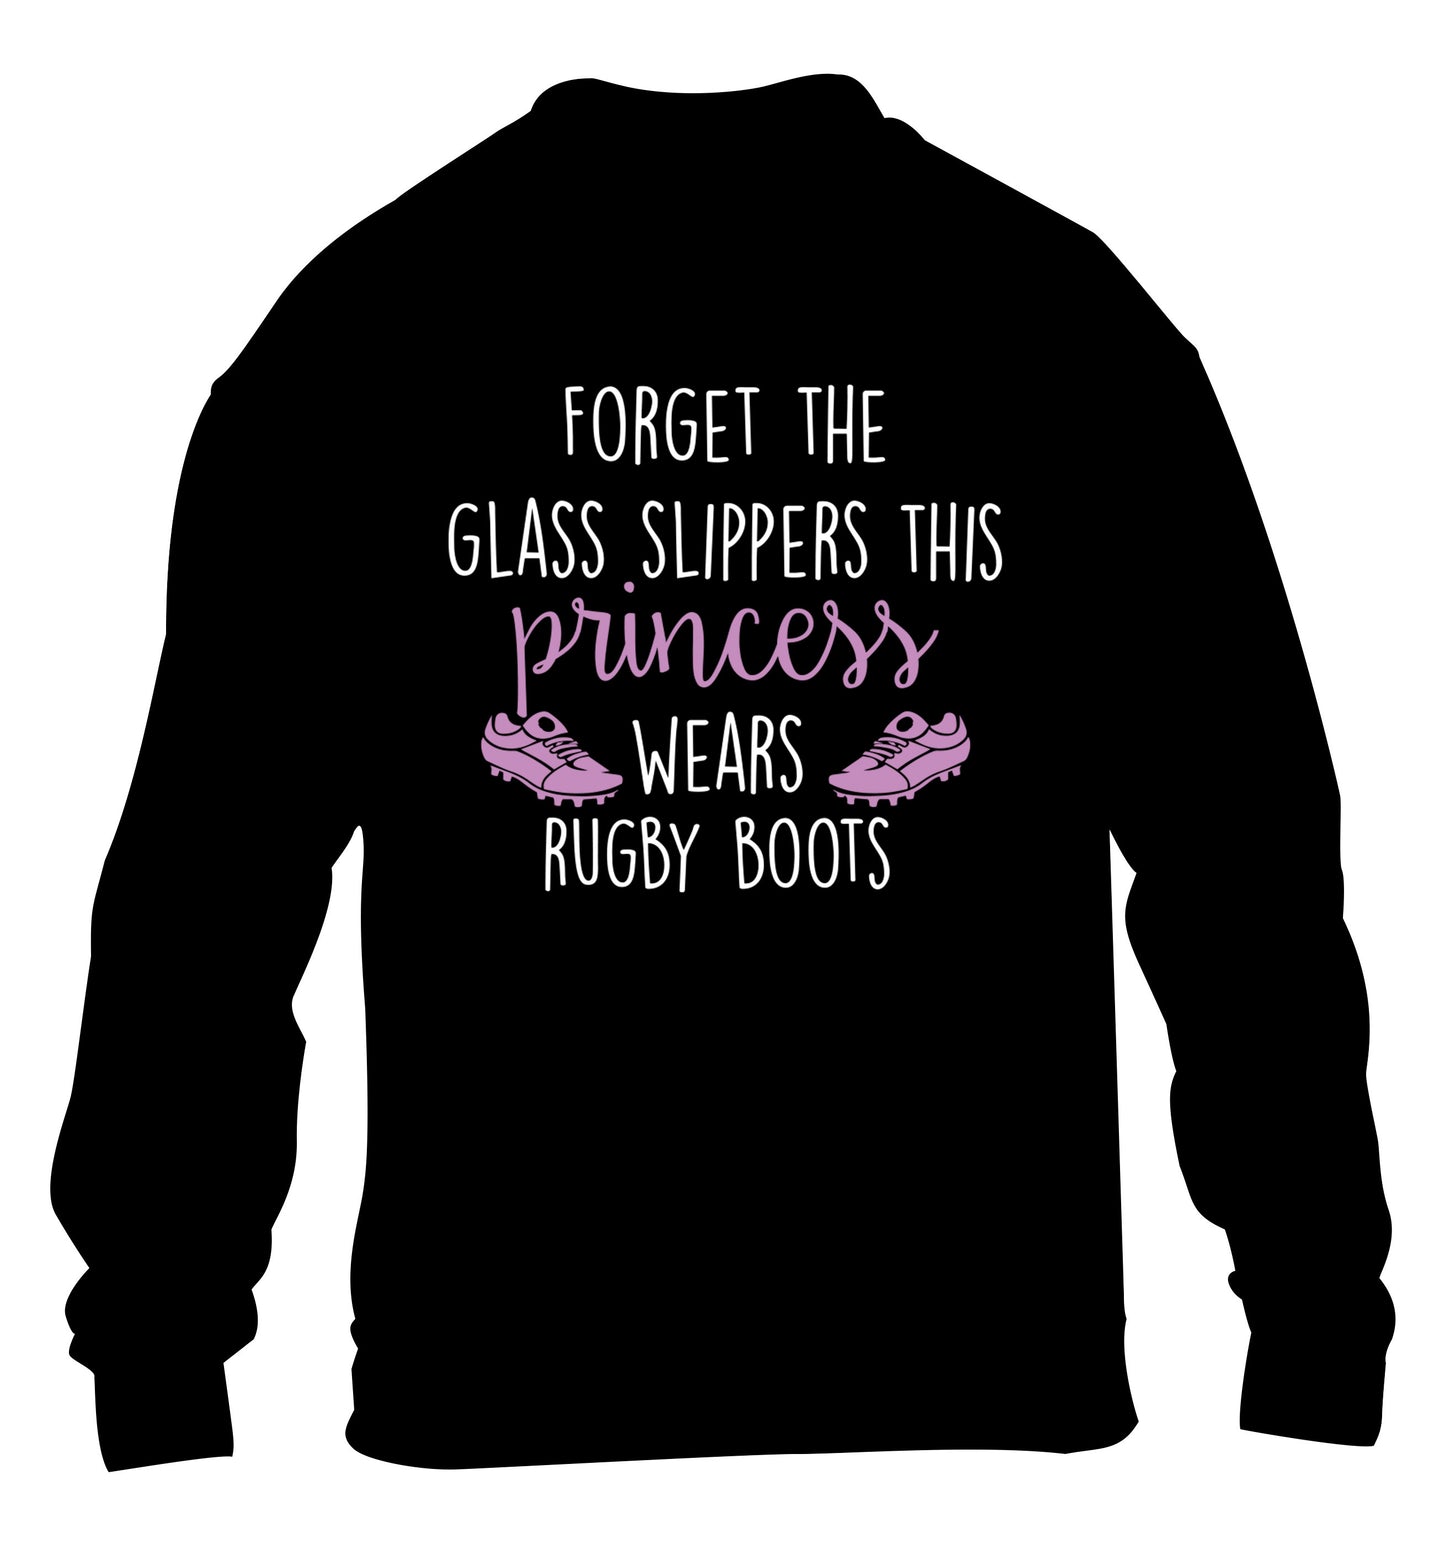 Forget the glass slippers this princess wears rugby boots children's black sweater 12-14 Years